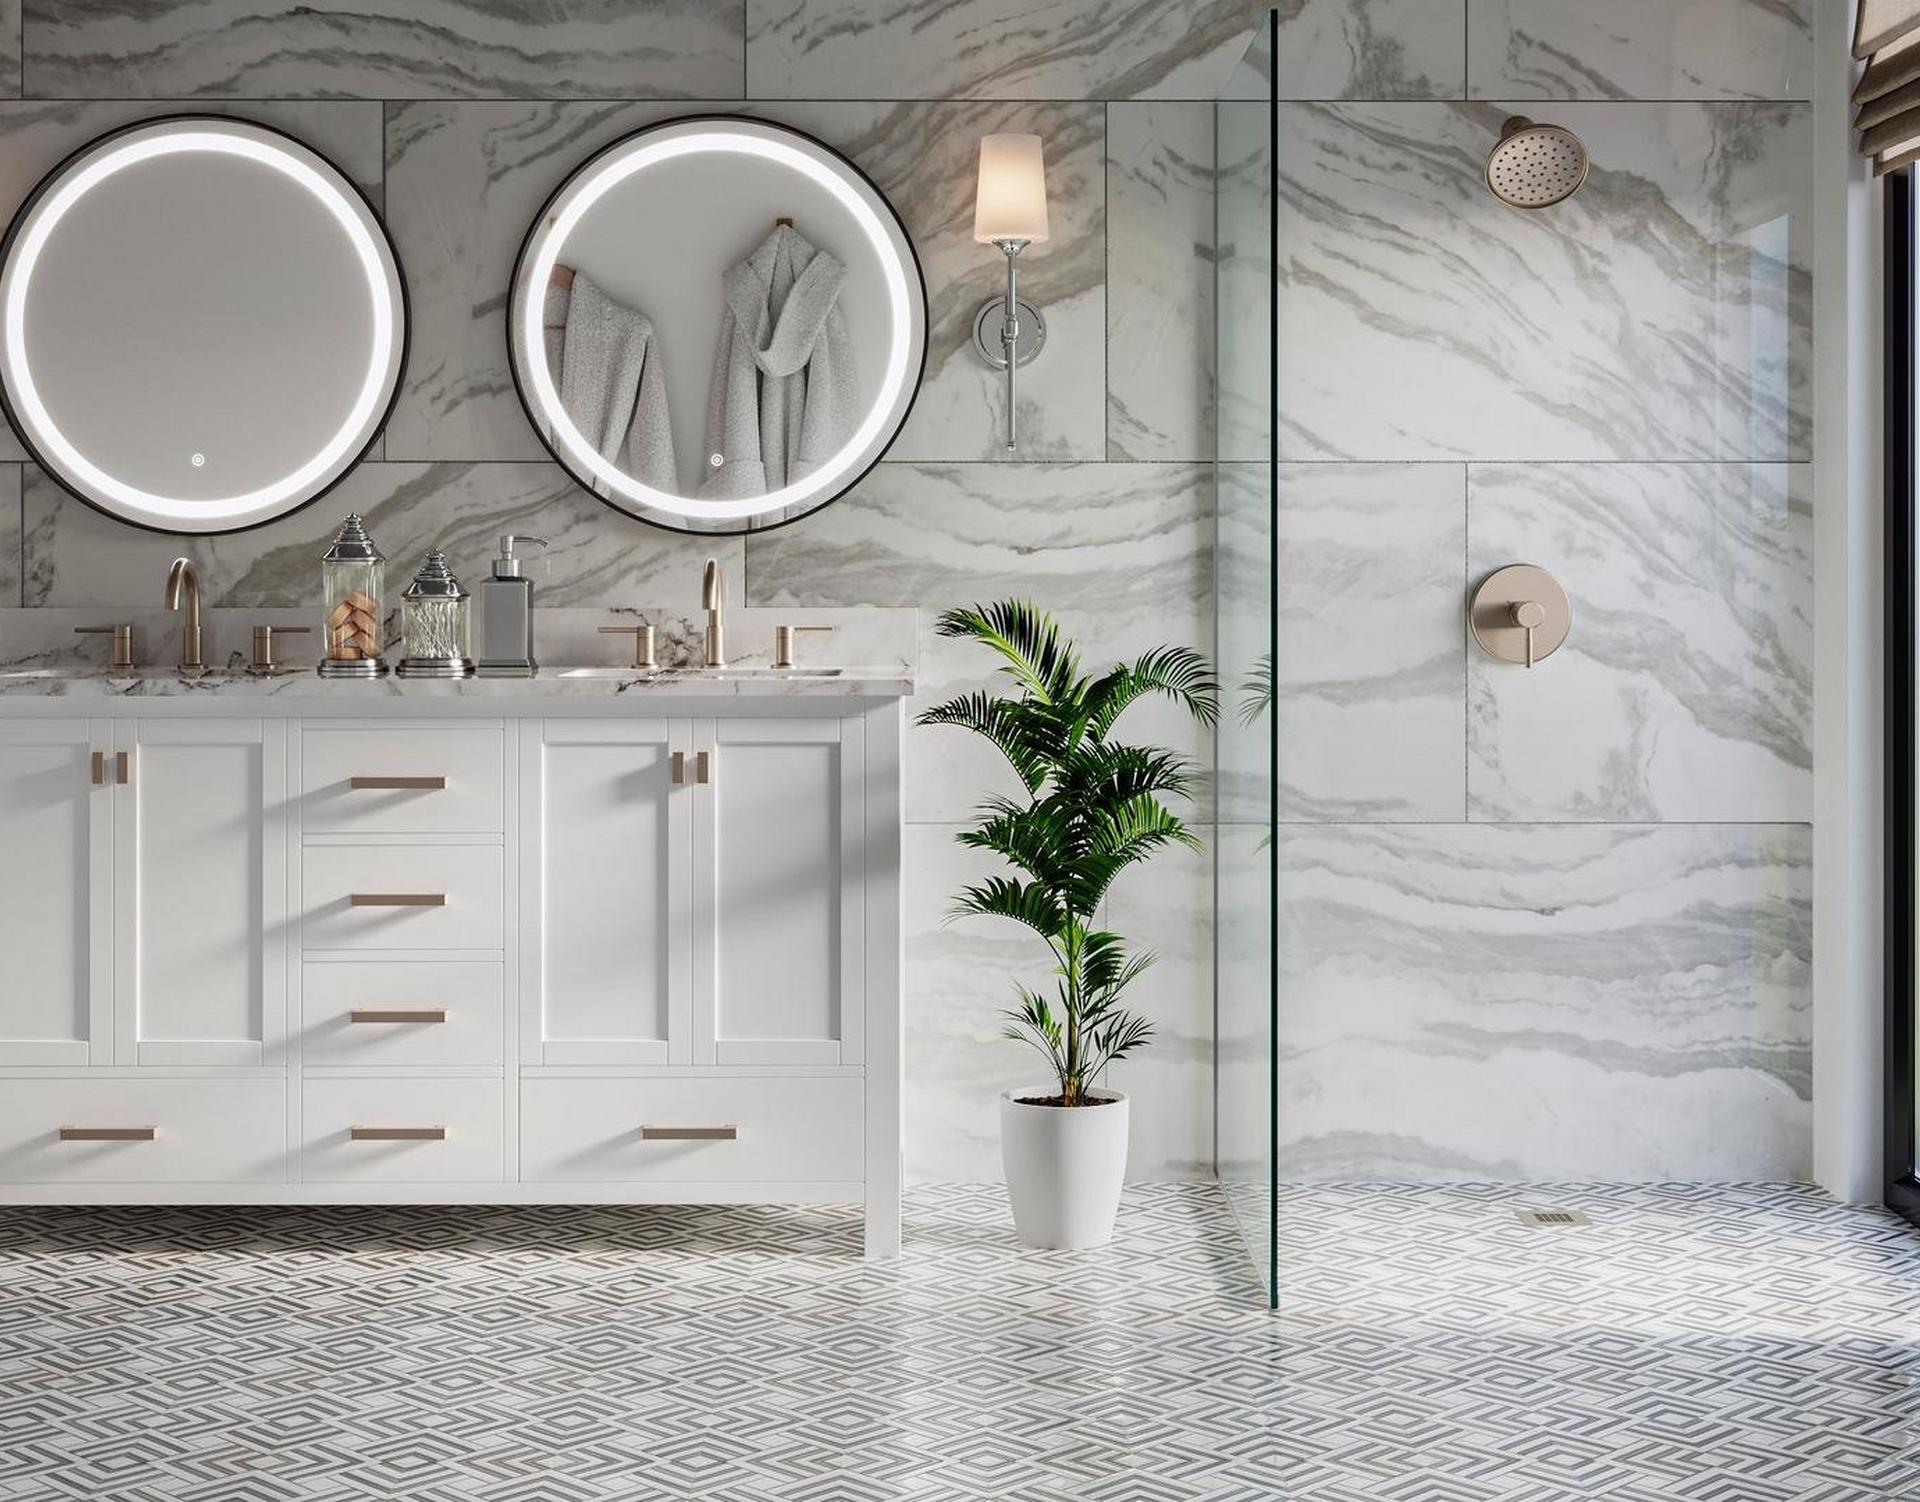 Marble bathroom scene with gray and white kaleidoscope marble mosaic floors